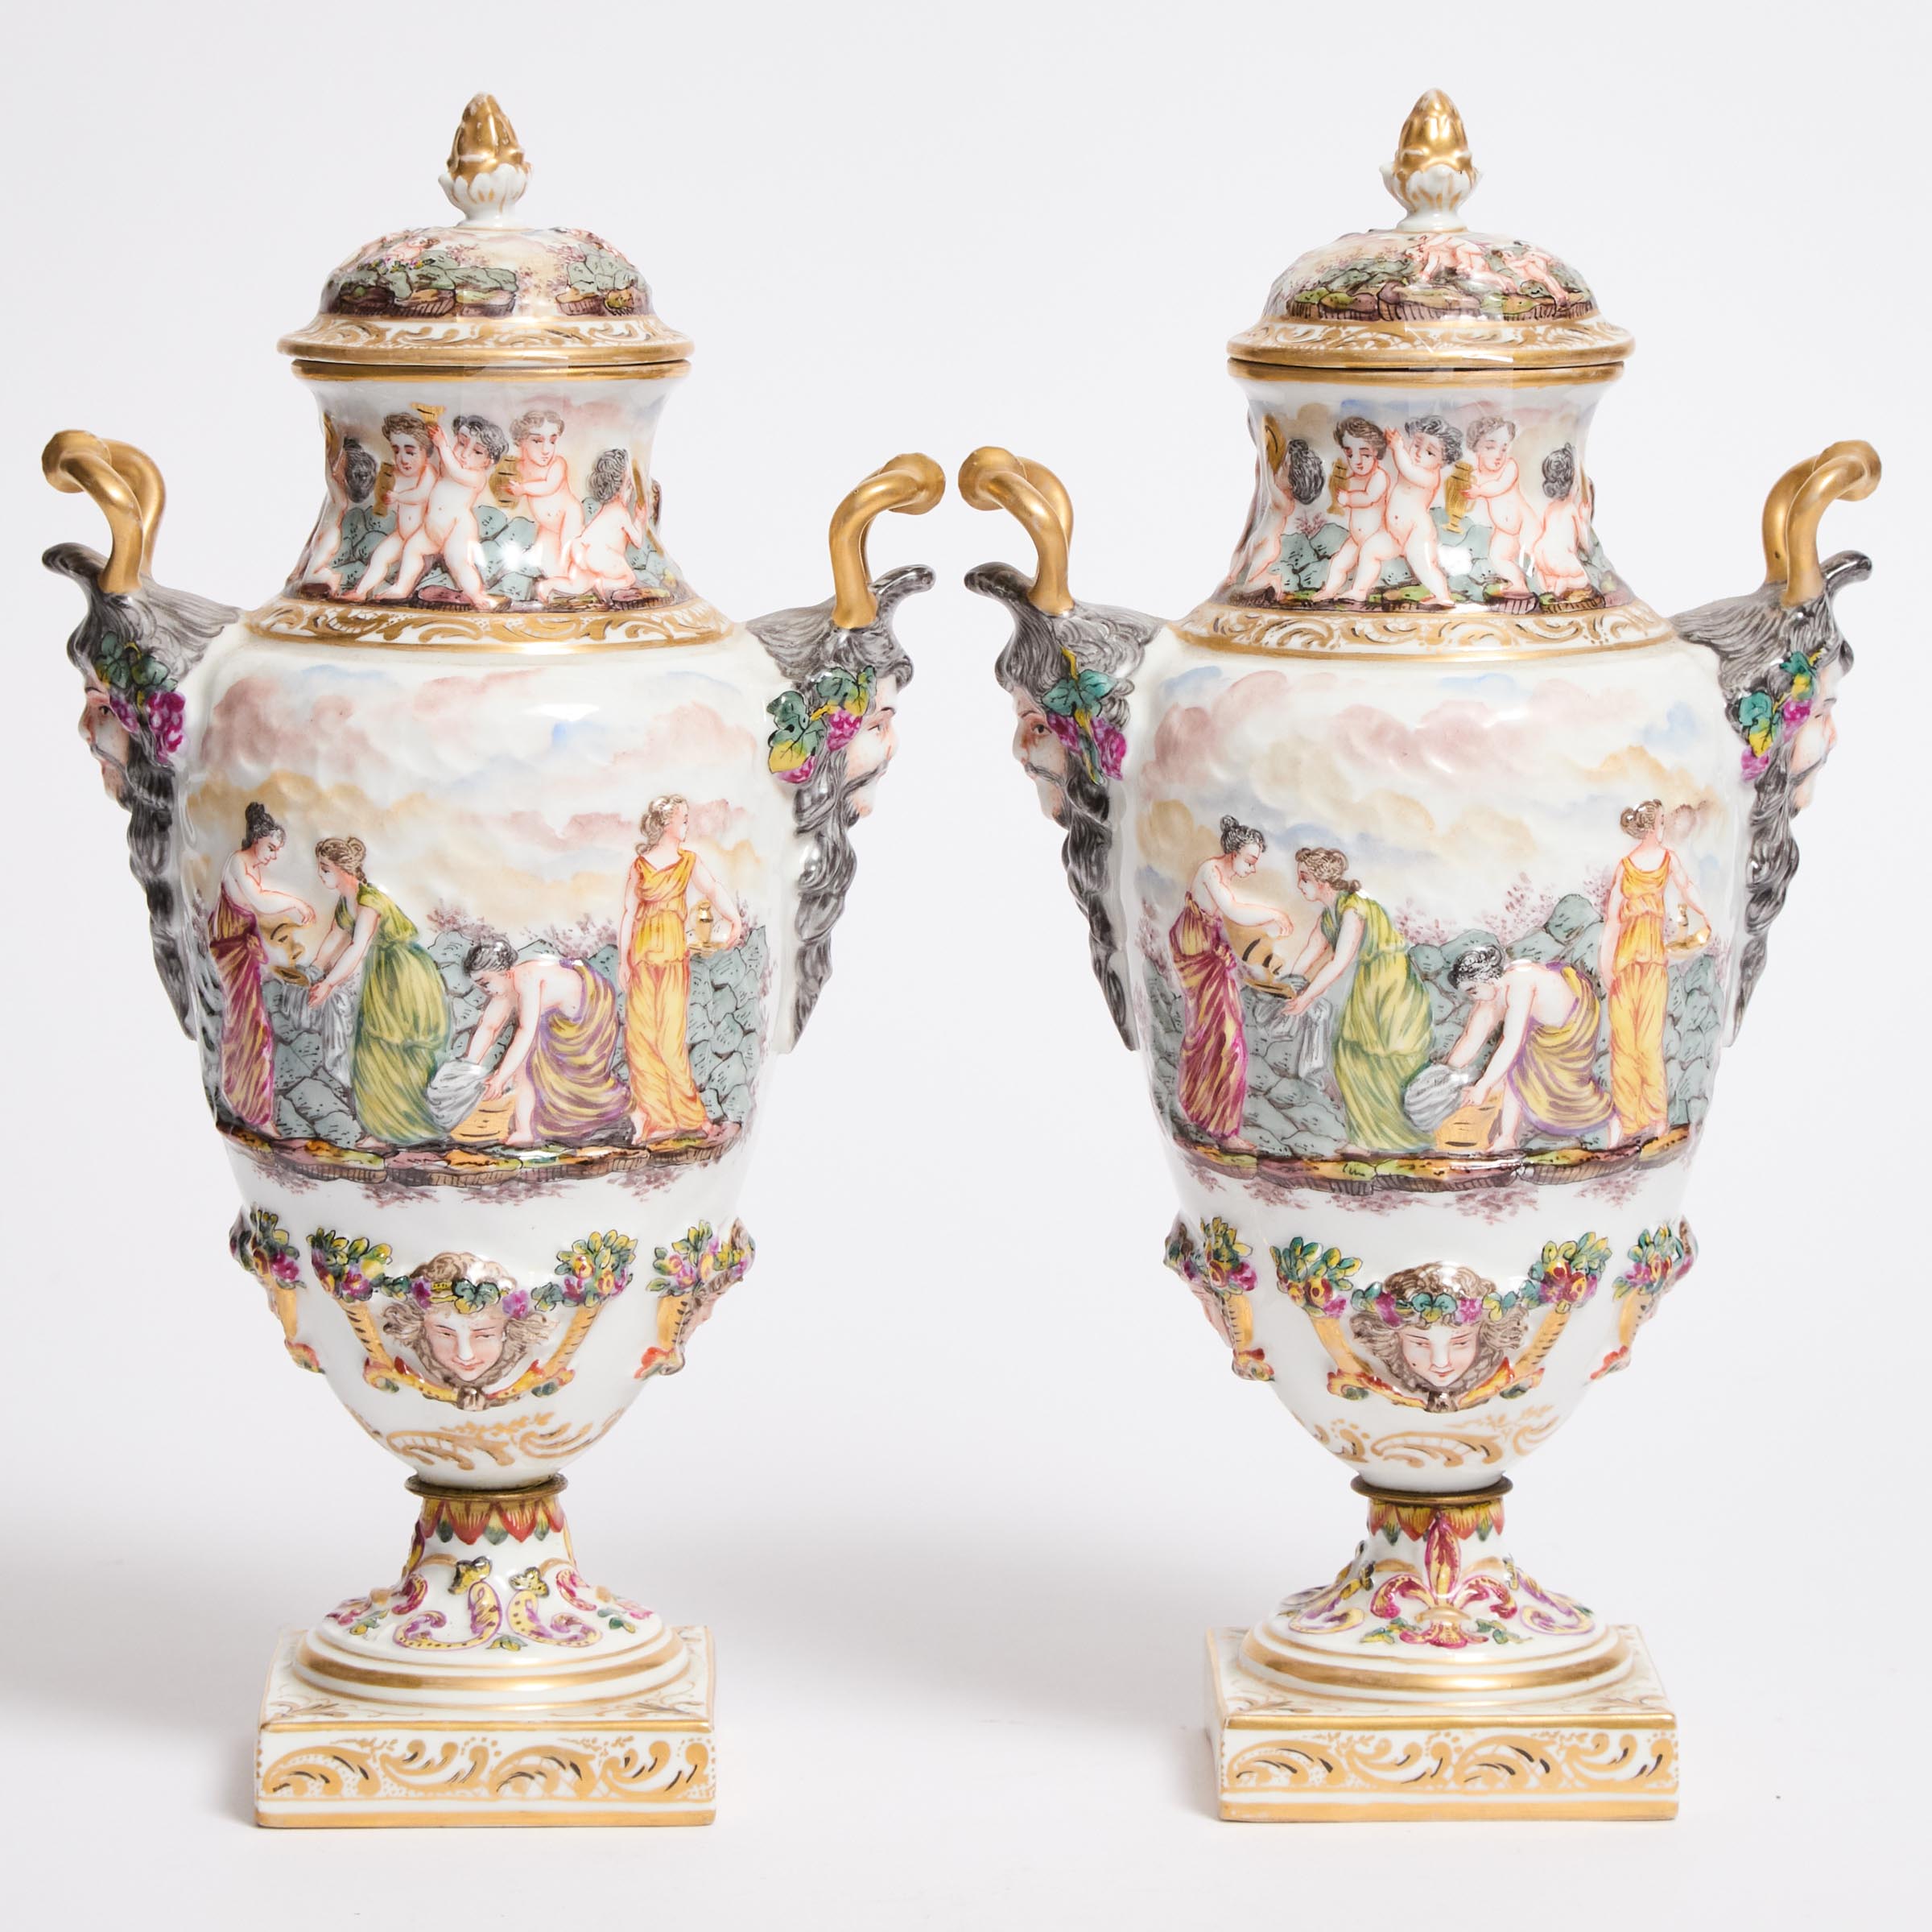 Pair of 'Naples' Porcelain Covered